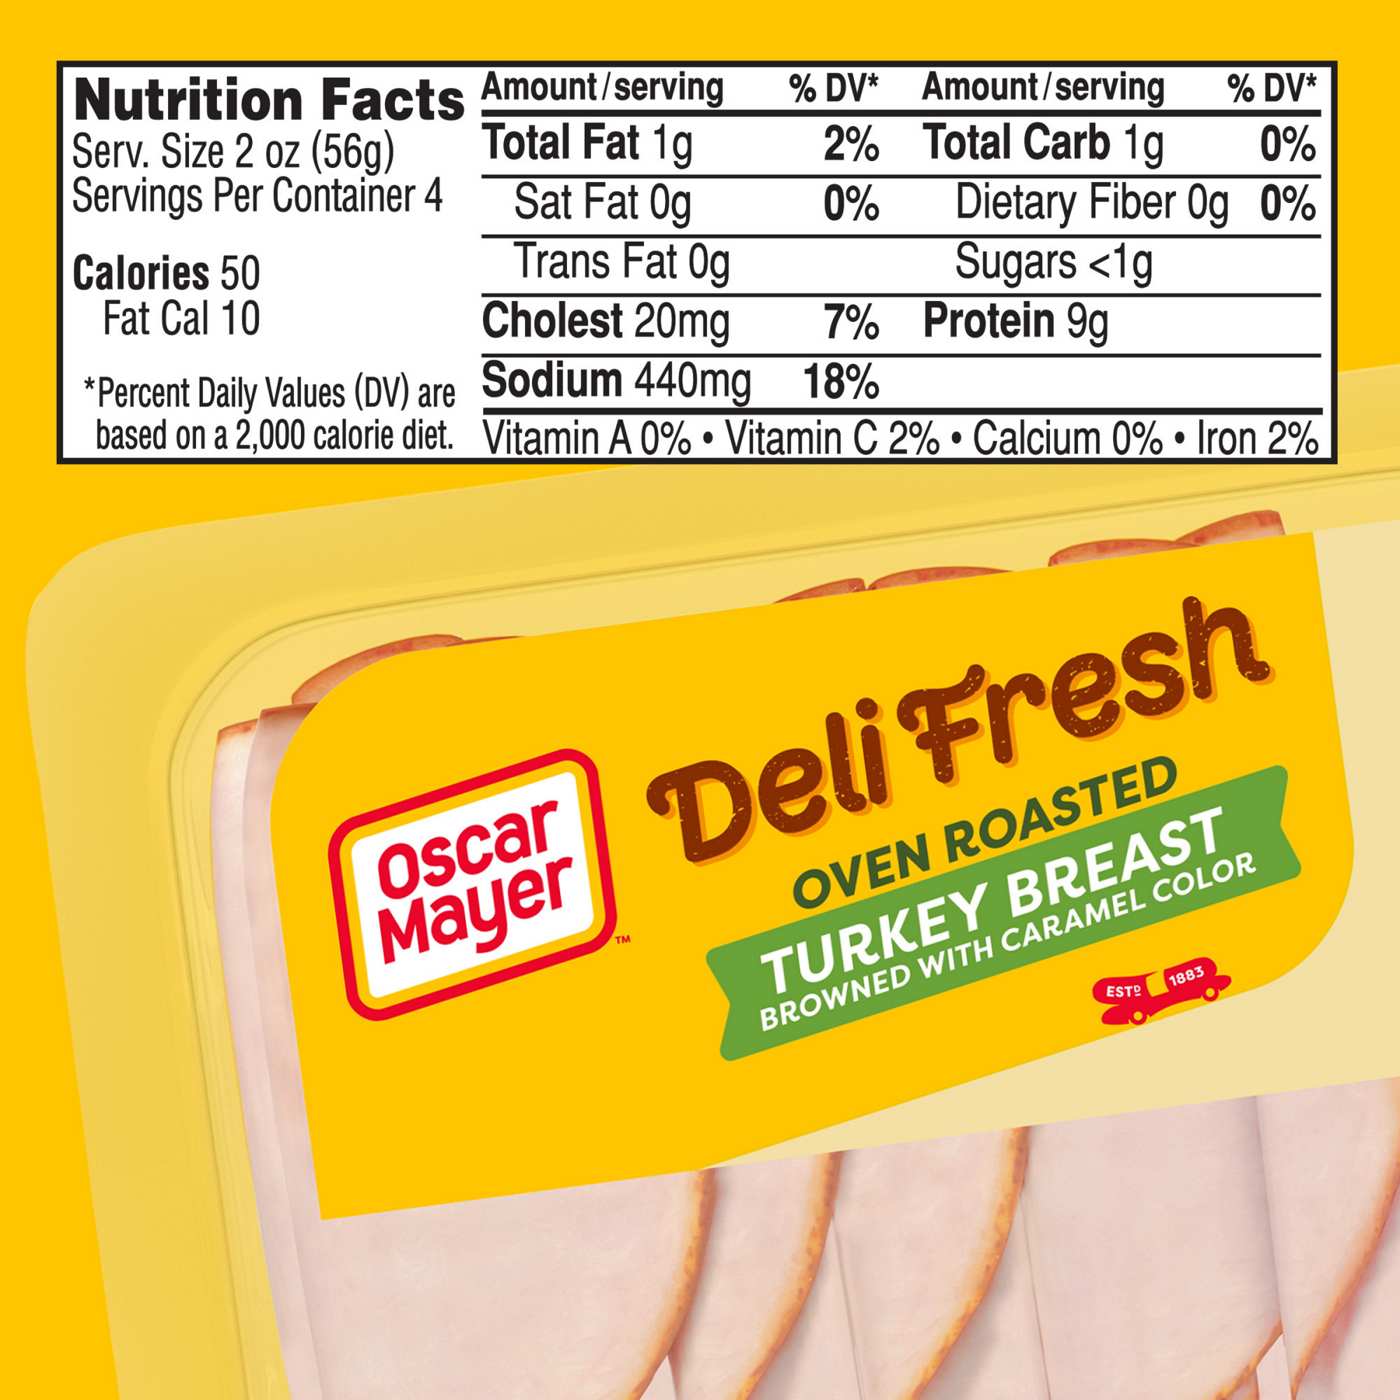 Oscar Mayer Deli Fresh Lower Sodium Oven Roasted Sliced Turkey Breast Lunch Meat; image 4 of 6